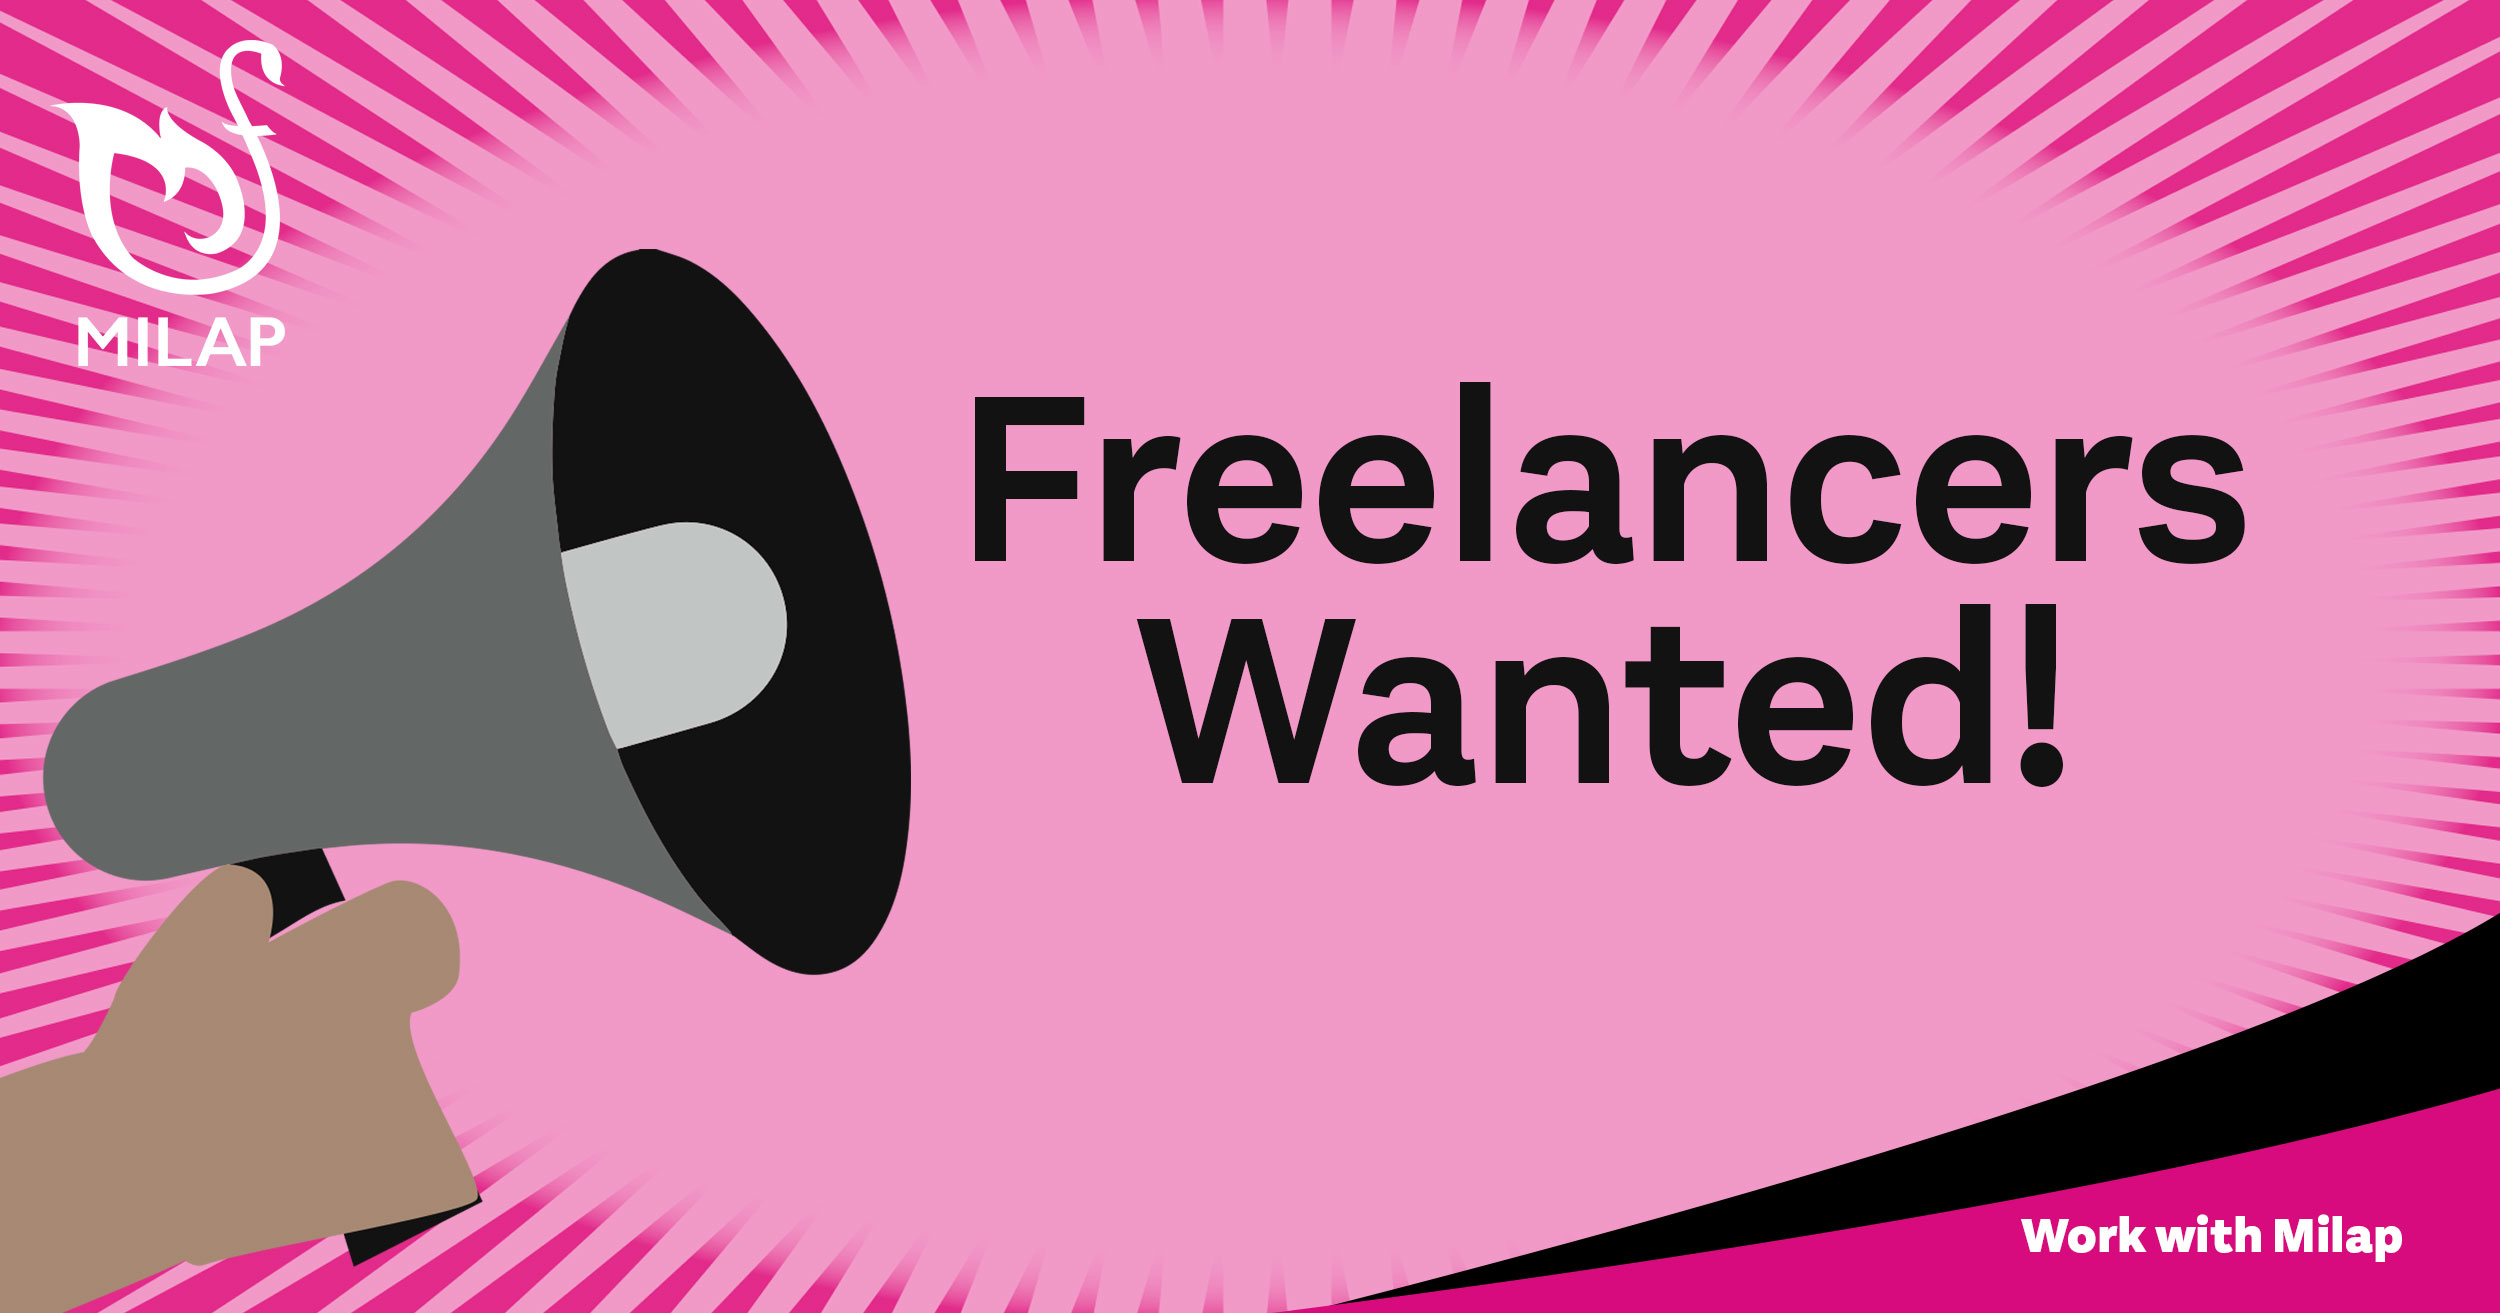 Freelancers wanted!